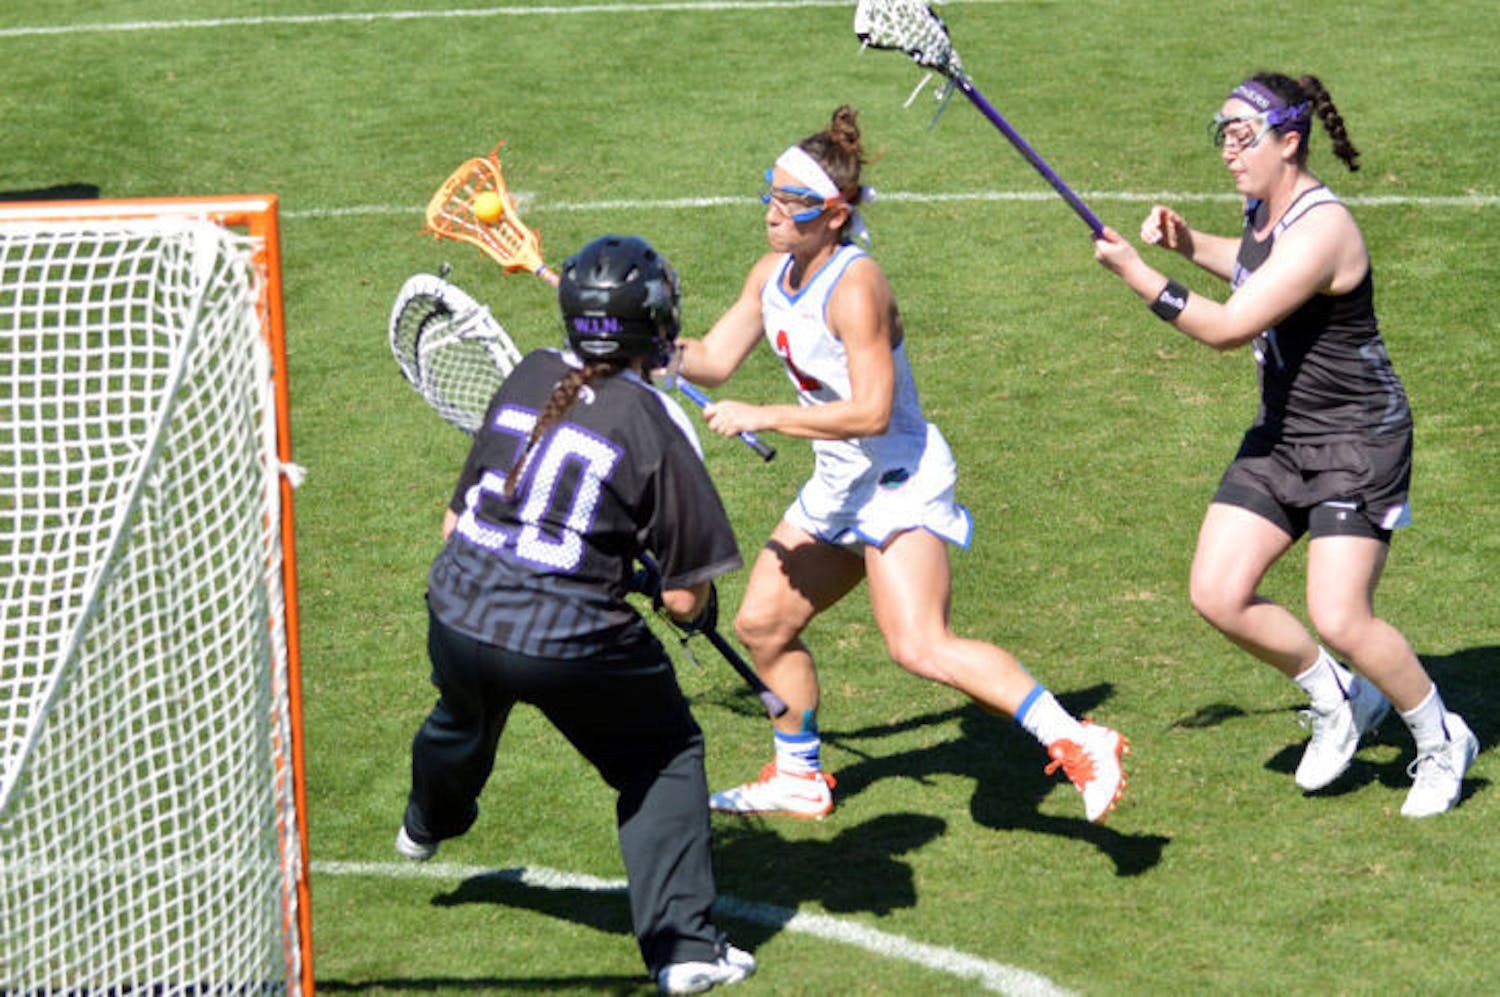 Sammi Burgess attempts a shot during Florida's 18-7 win against High Point on Feb. 15 at Donald R. Dizney Stadium. Burgess, the ALC Rookie of the Week, scored a career-high four goals against Vanderbilt on Sunday.